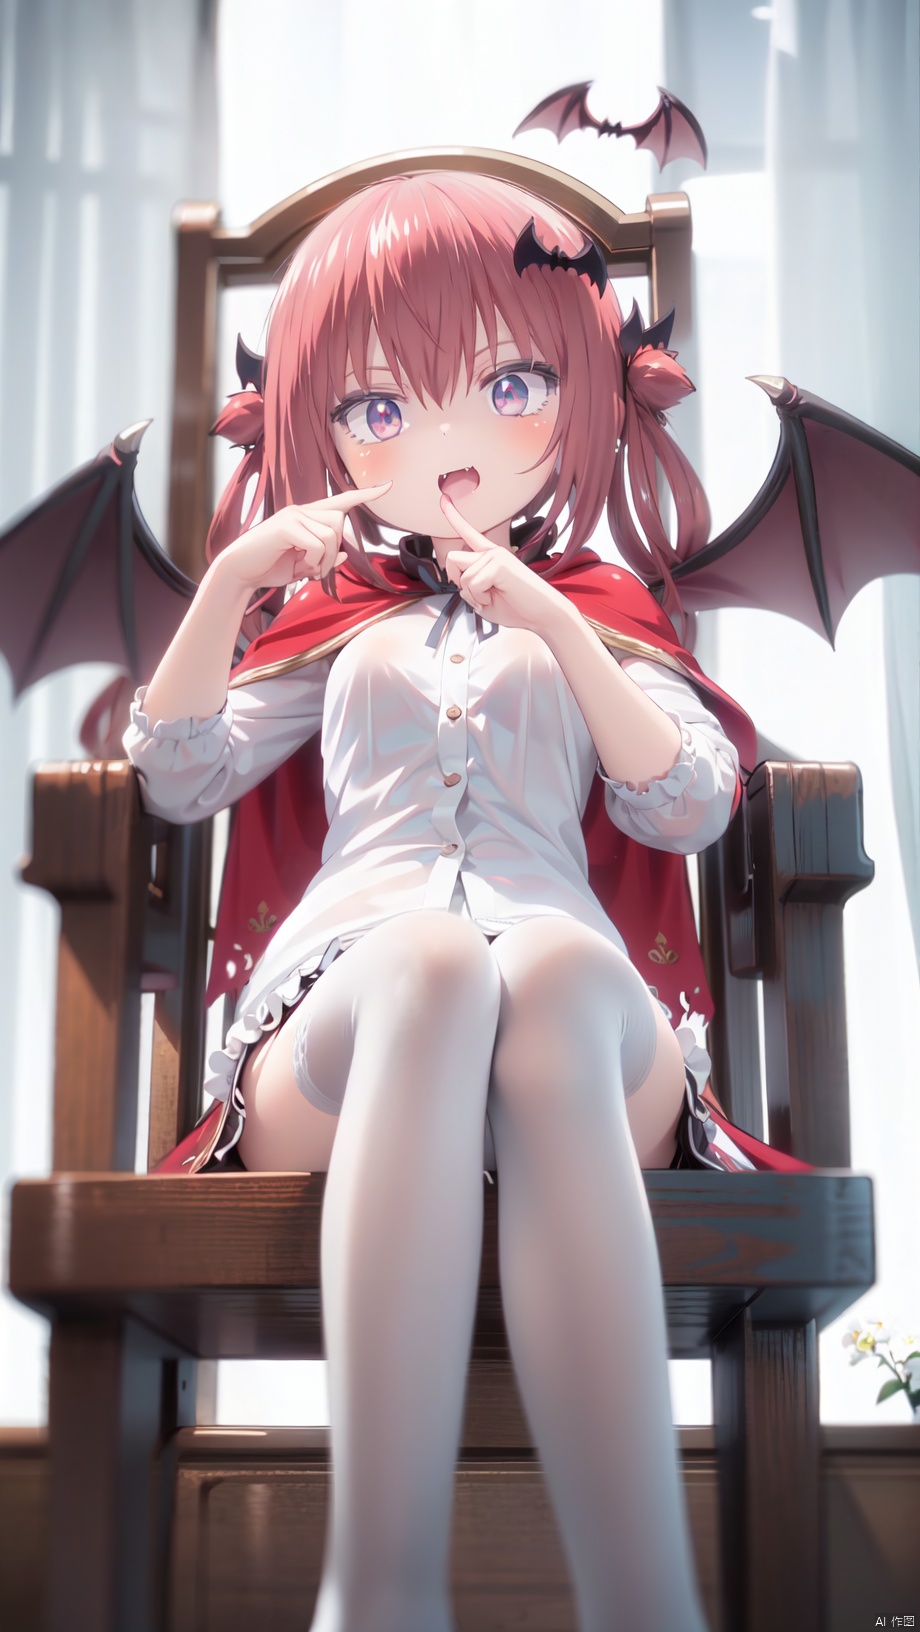 Satanichia Kurumizawa Mcdowell,gothic lolita,loli,beautiful detailed girl,narrow waist,very small breasts,Glowing skin,Delicate cute face,cape,princess dress,torn clothes,fine fabric emphasis,ornate clothes,red eyes eyes,beautiful detailed eyes,glowing eyes,(raised eyebrow),((red hair)),((long hair,bat wings hair ornament)),Glowing hair,Extremely delicate hair,Thin leg,white legwear garter,beautiful detailed fingers,Slender fingers,steepled fingers,Shiny nails,(sitting on throne),mischievous smile(expression),open mouth,tongue out,fangs out,beautiful detailed mouth,looking at viewer,bat(ornament),palace,ornate throne,hyper realistic,magic,8k,incredible quality,best quality,masterpiece,highly detailed,extremely detailed CG,cinematic lighting,backlighting,full body,high definition,detail enhancement,(perfect hands, perfect anatomy),detail enhancement, cozy animation scenes